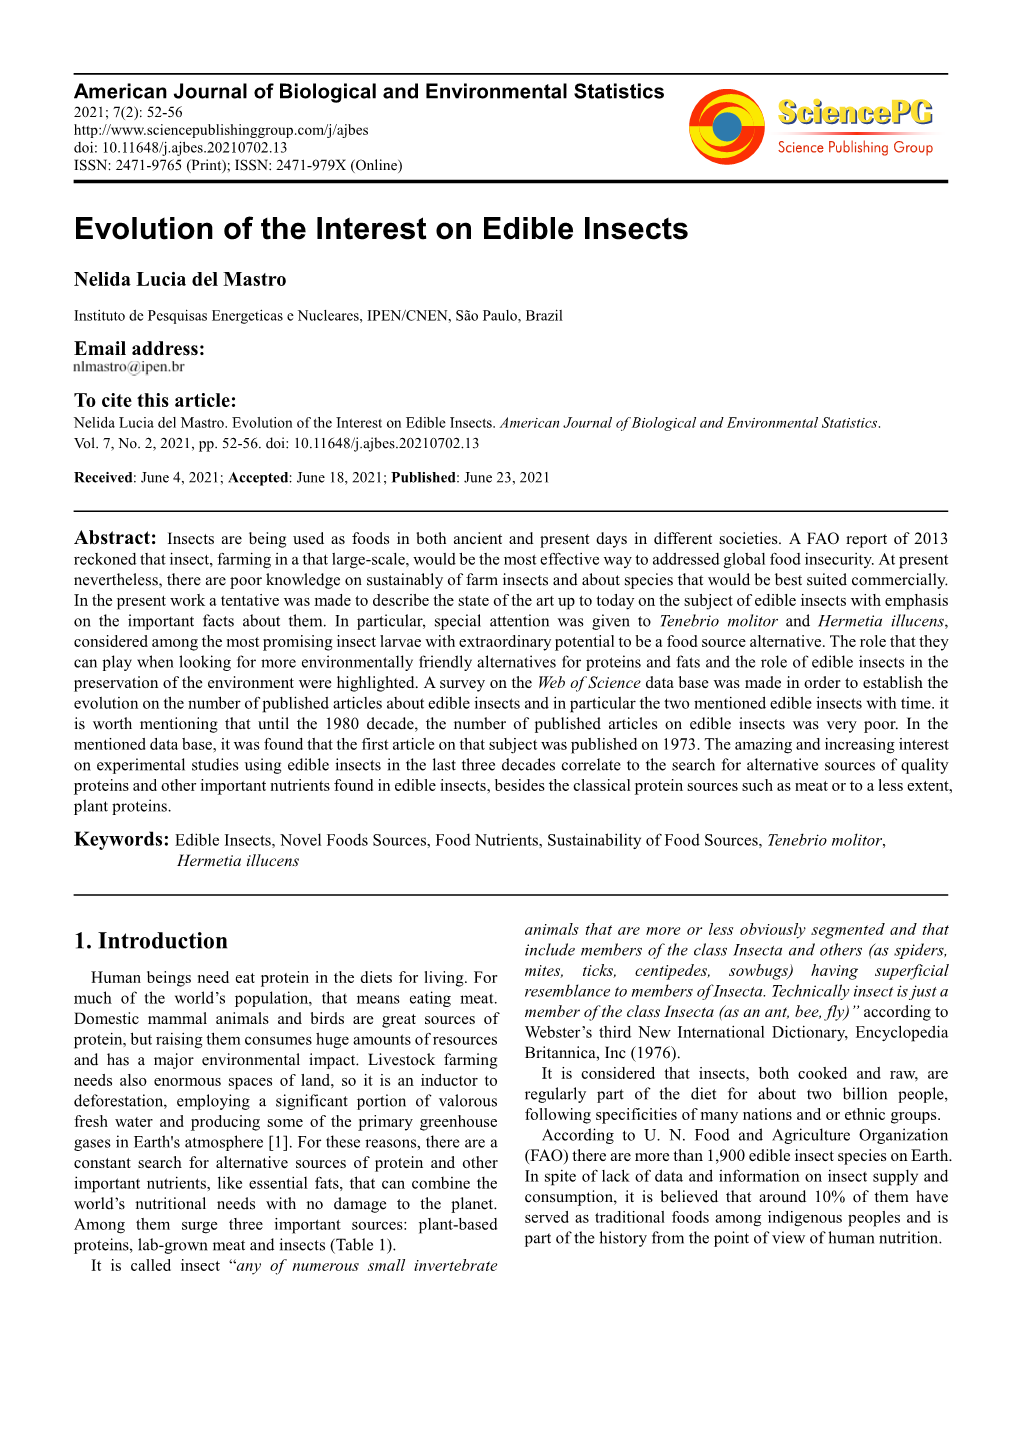 Evolution of the Interest on Edible Insects